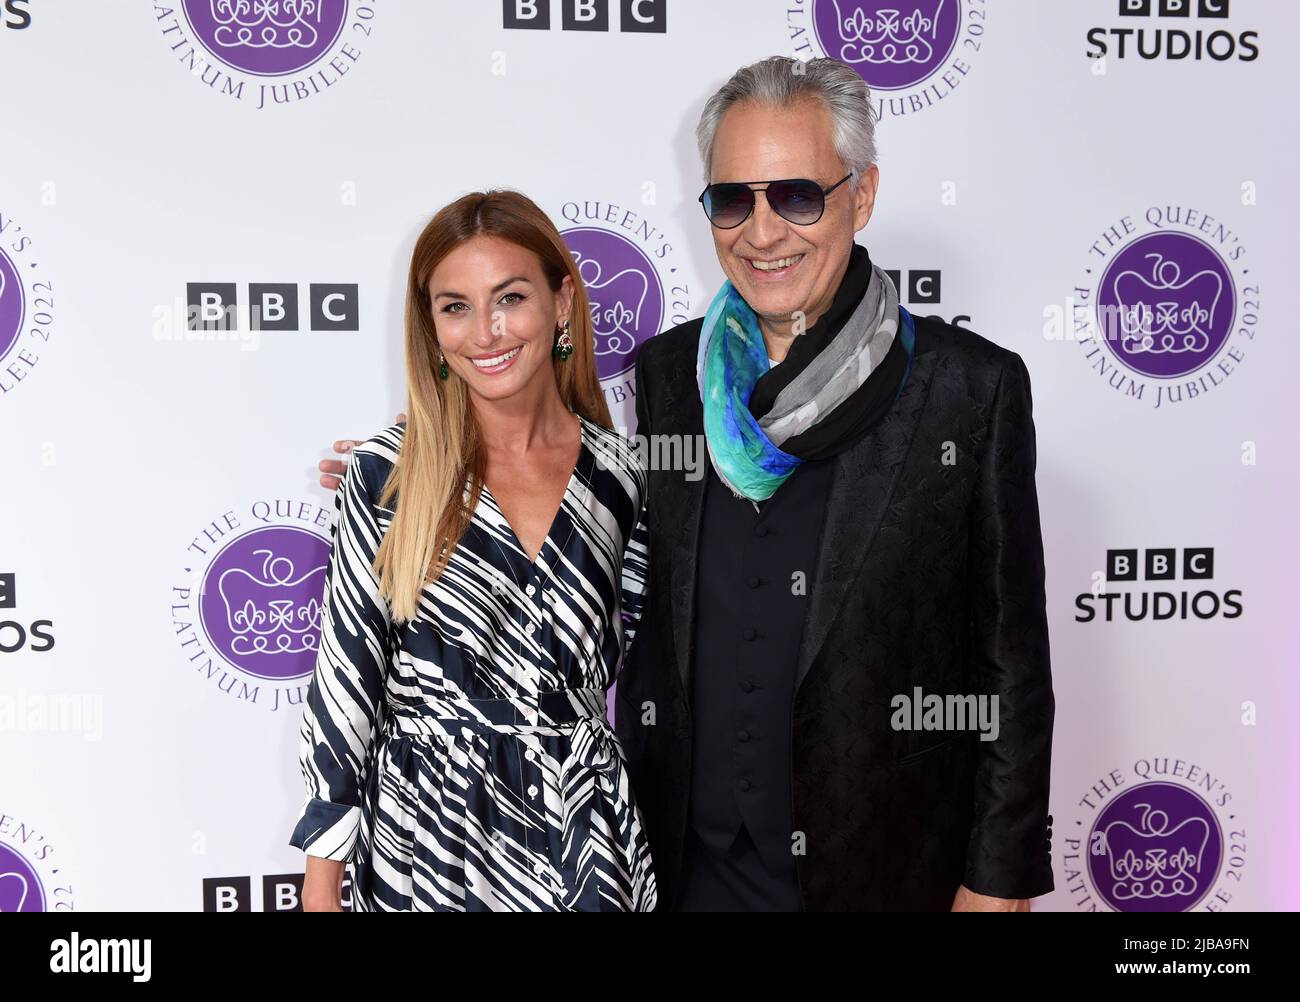 EDITORIAL USE ONLY Opera singer Andrea Bocelli with conductor Beatrice Venezi attends the BBC Platinum Party at Palace backstage press room, London, on day three of the Platinum Jubilee celebrations for Queen Elizabeth II. Picture date: Saturday June 4, 2022. Stock Photo